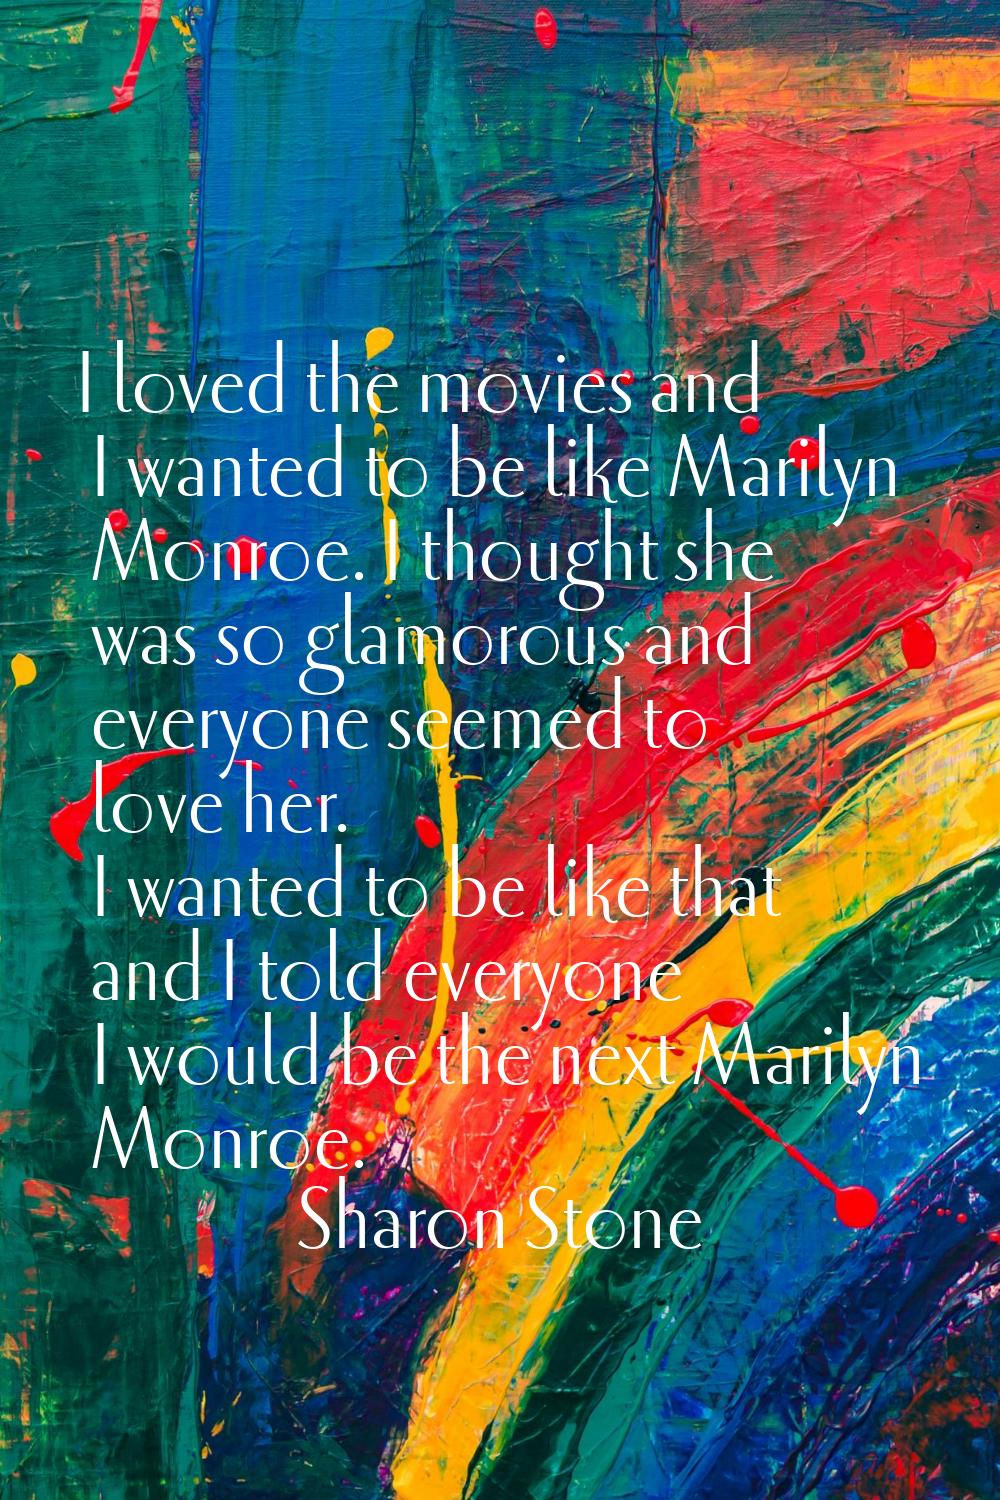 I loved the movies and I wanted to be like Marilyn Monroe. I thought she was so glamorous and every